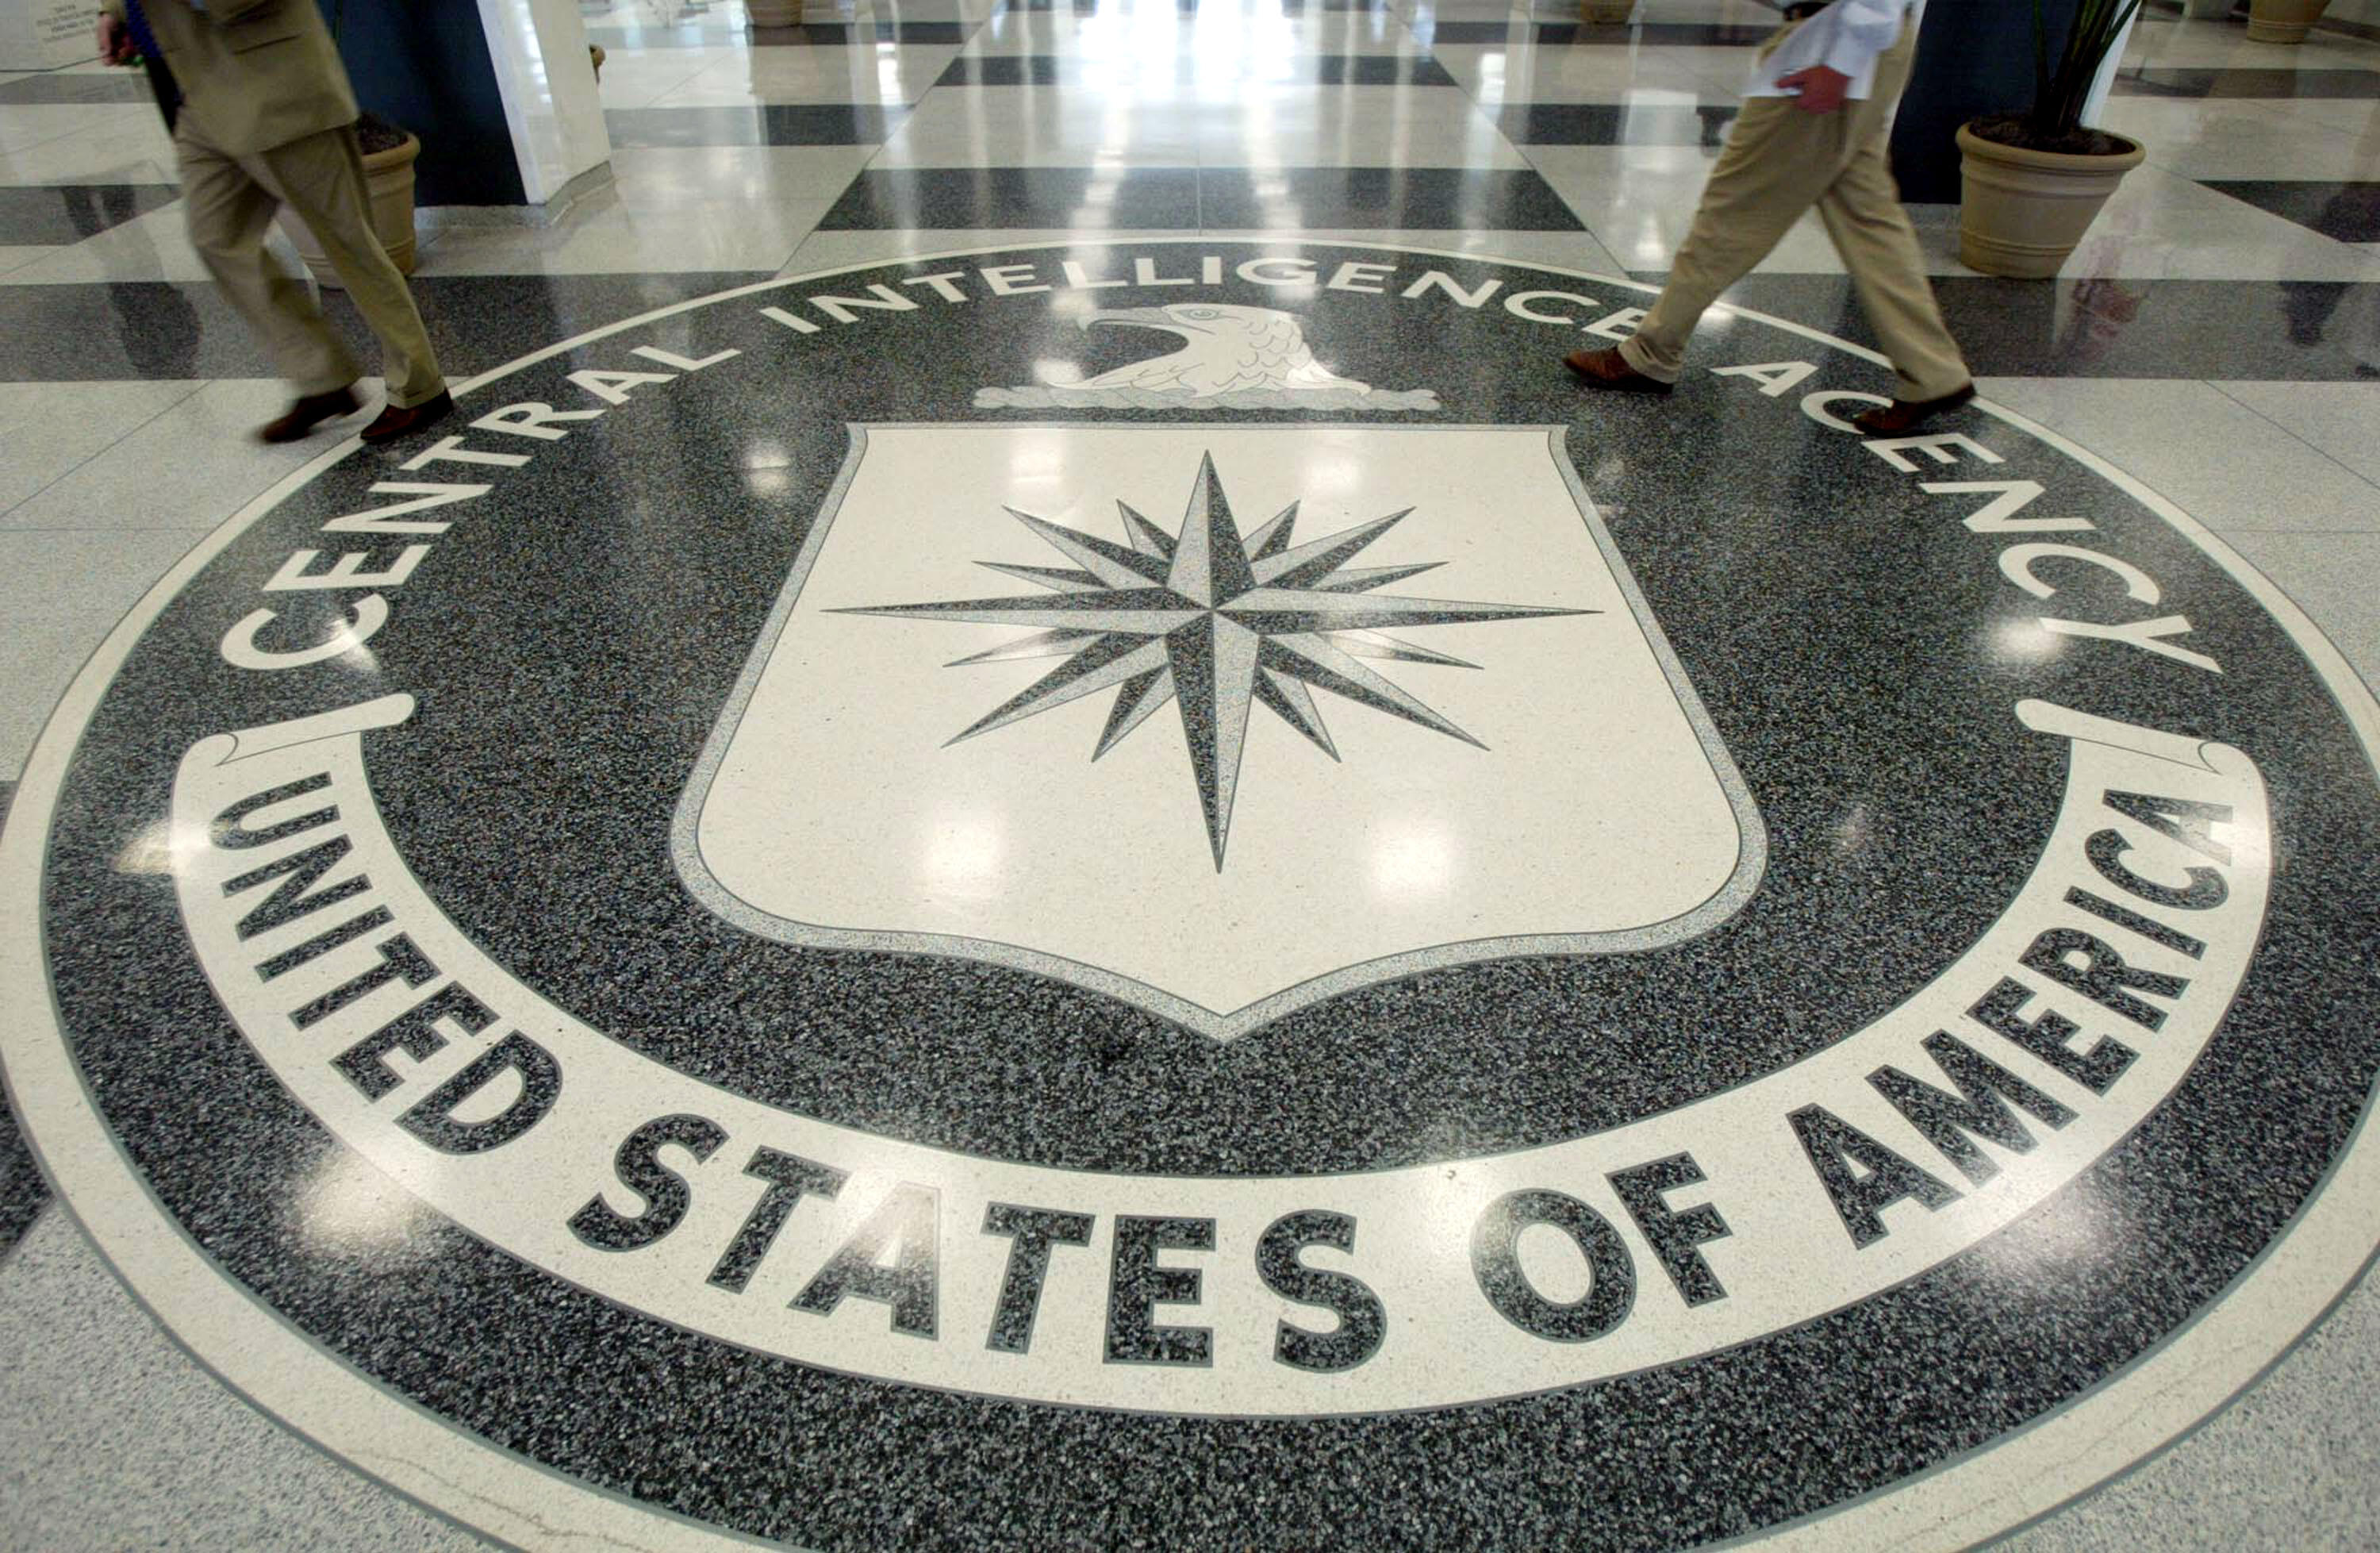 LANGLEY, VA - JULY 9: The CIA symbol is shown on the floor of CIA Headquarters, July 9, 2004 at CIA headquarters in Langley, Virginia. Earlier today the Senate Intelligence Committee released its report on the numerous failures in the CIA reporting of all